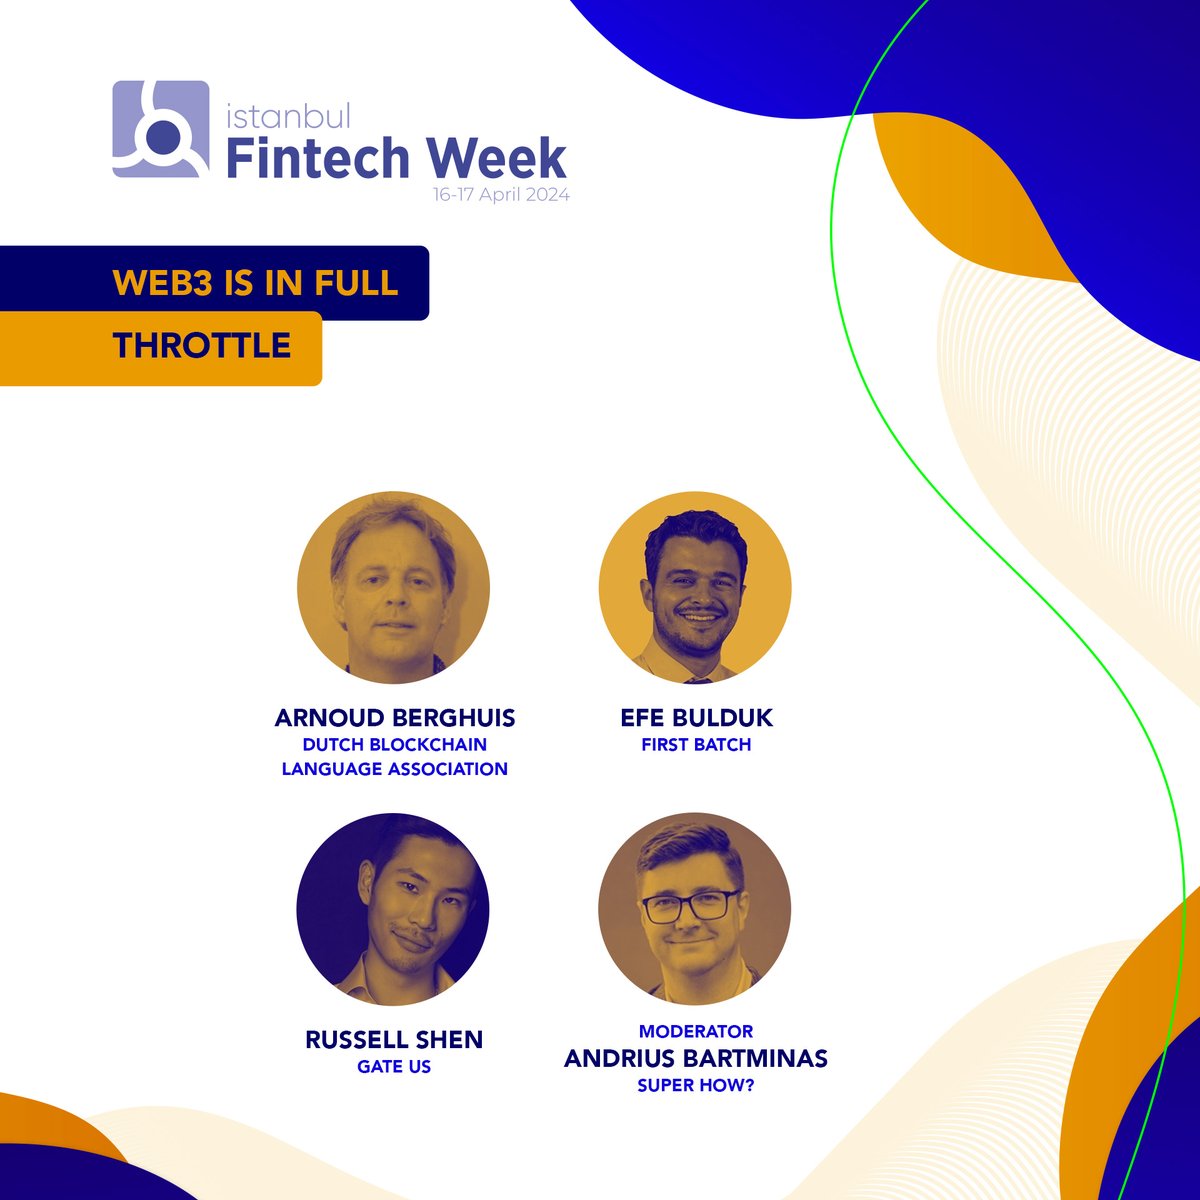 📢 Web3 is in full throttle

We will discuss 'Web3 is in full throttle' with Arnoud Berghuis, Andrius Bartminas, Efe Bulduk and, Russell Shen at our Web3 Summit!

Interested in Web3? Get your ticket today and join us at IFW'24! 🎟️
istanbulfintechweek.com